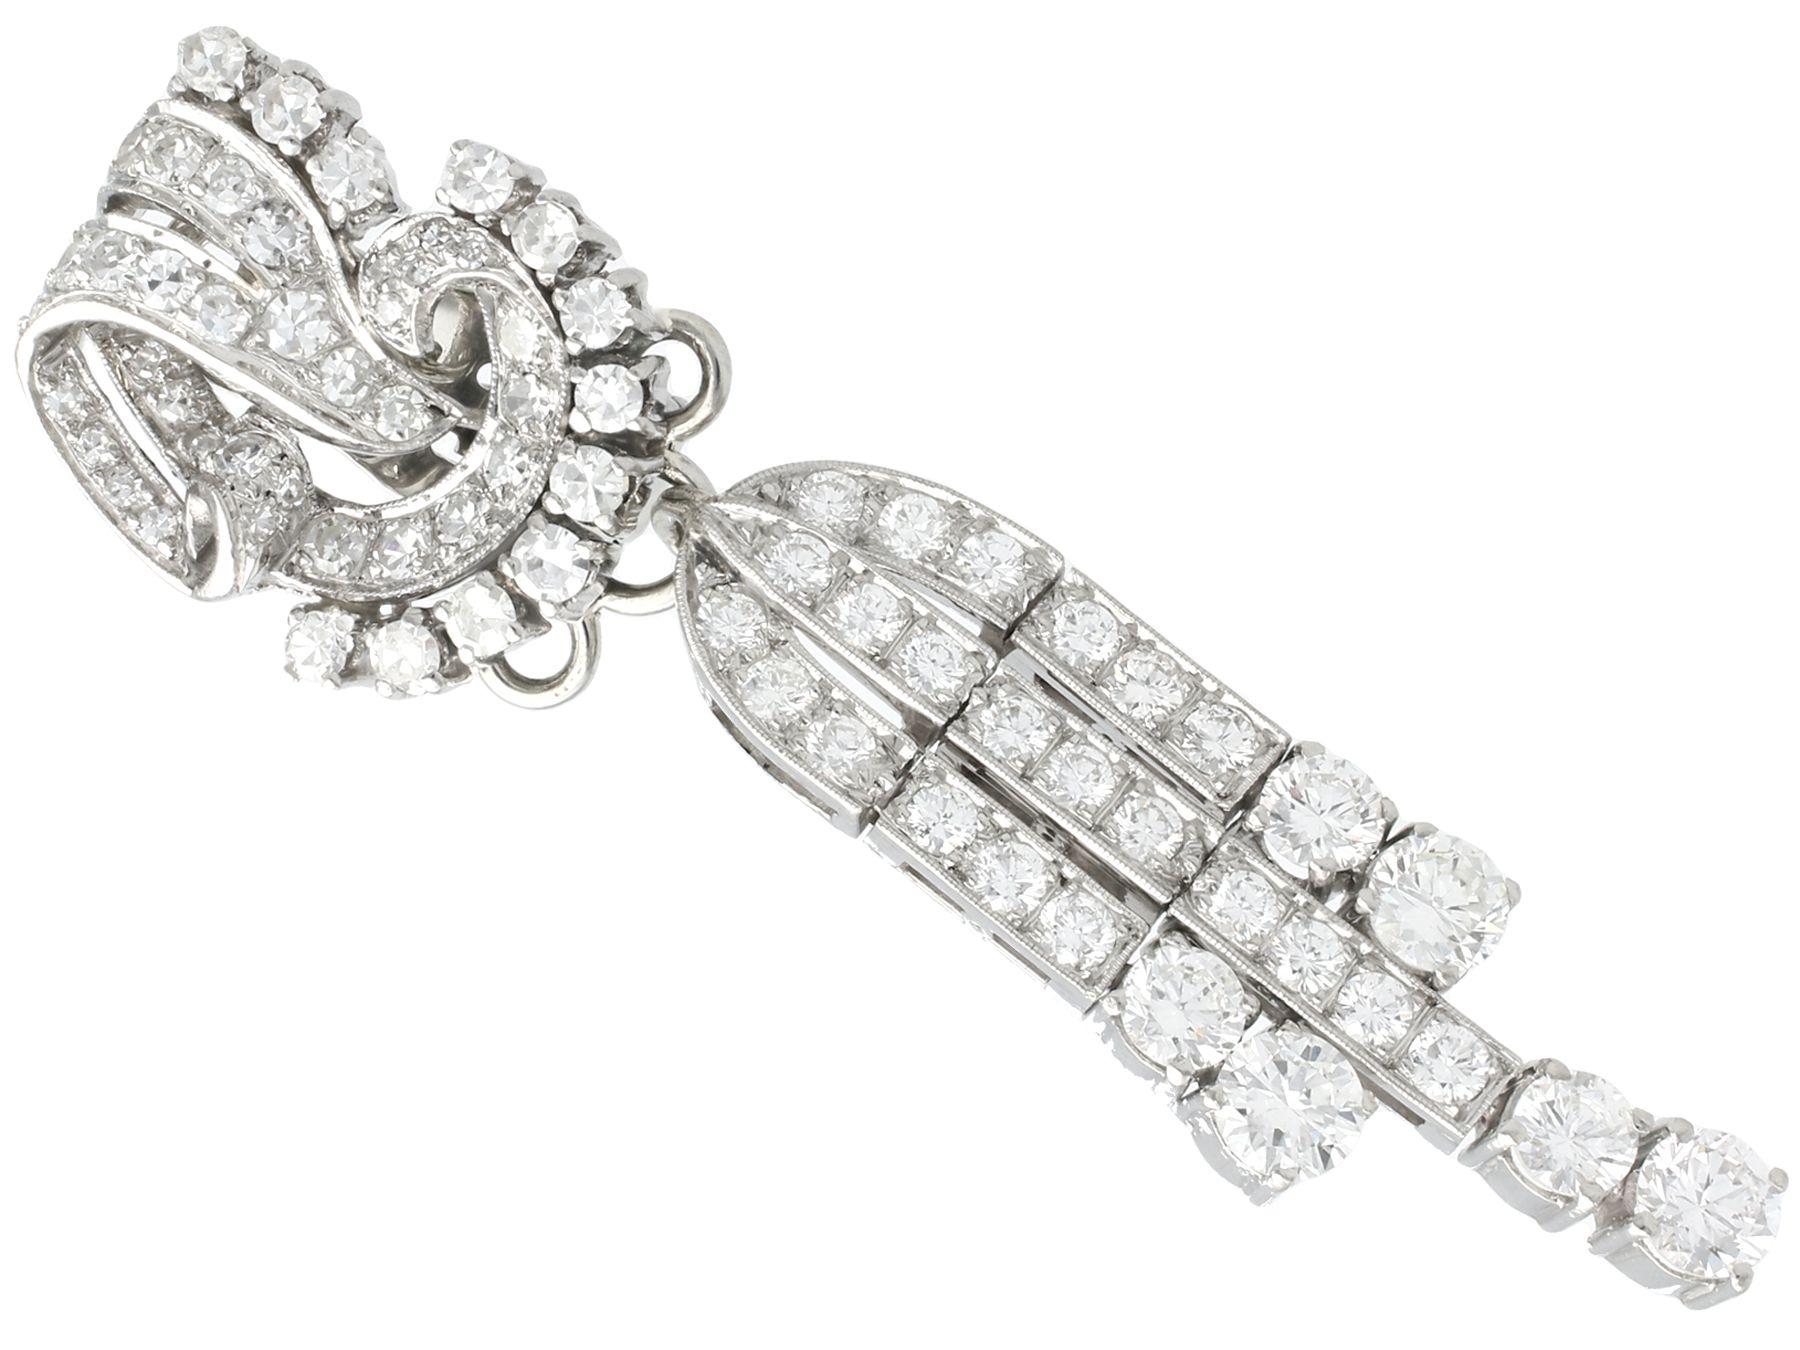 A stunning pair of vintage Art Deco 6.70 carat diamond and platinum day and night earrings; part of our diverse antique jewelry and estate jewelry collections.

These stunning, fine and impressive day and night earrings have been crafted in